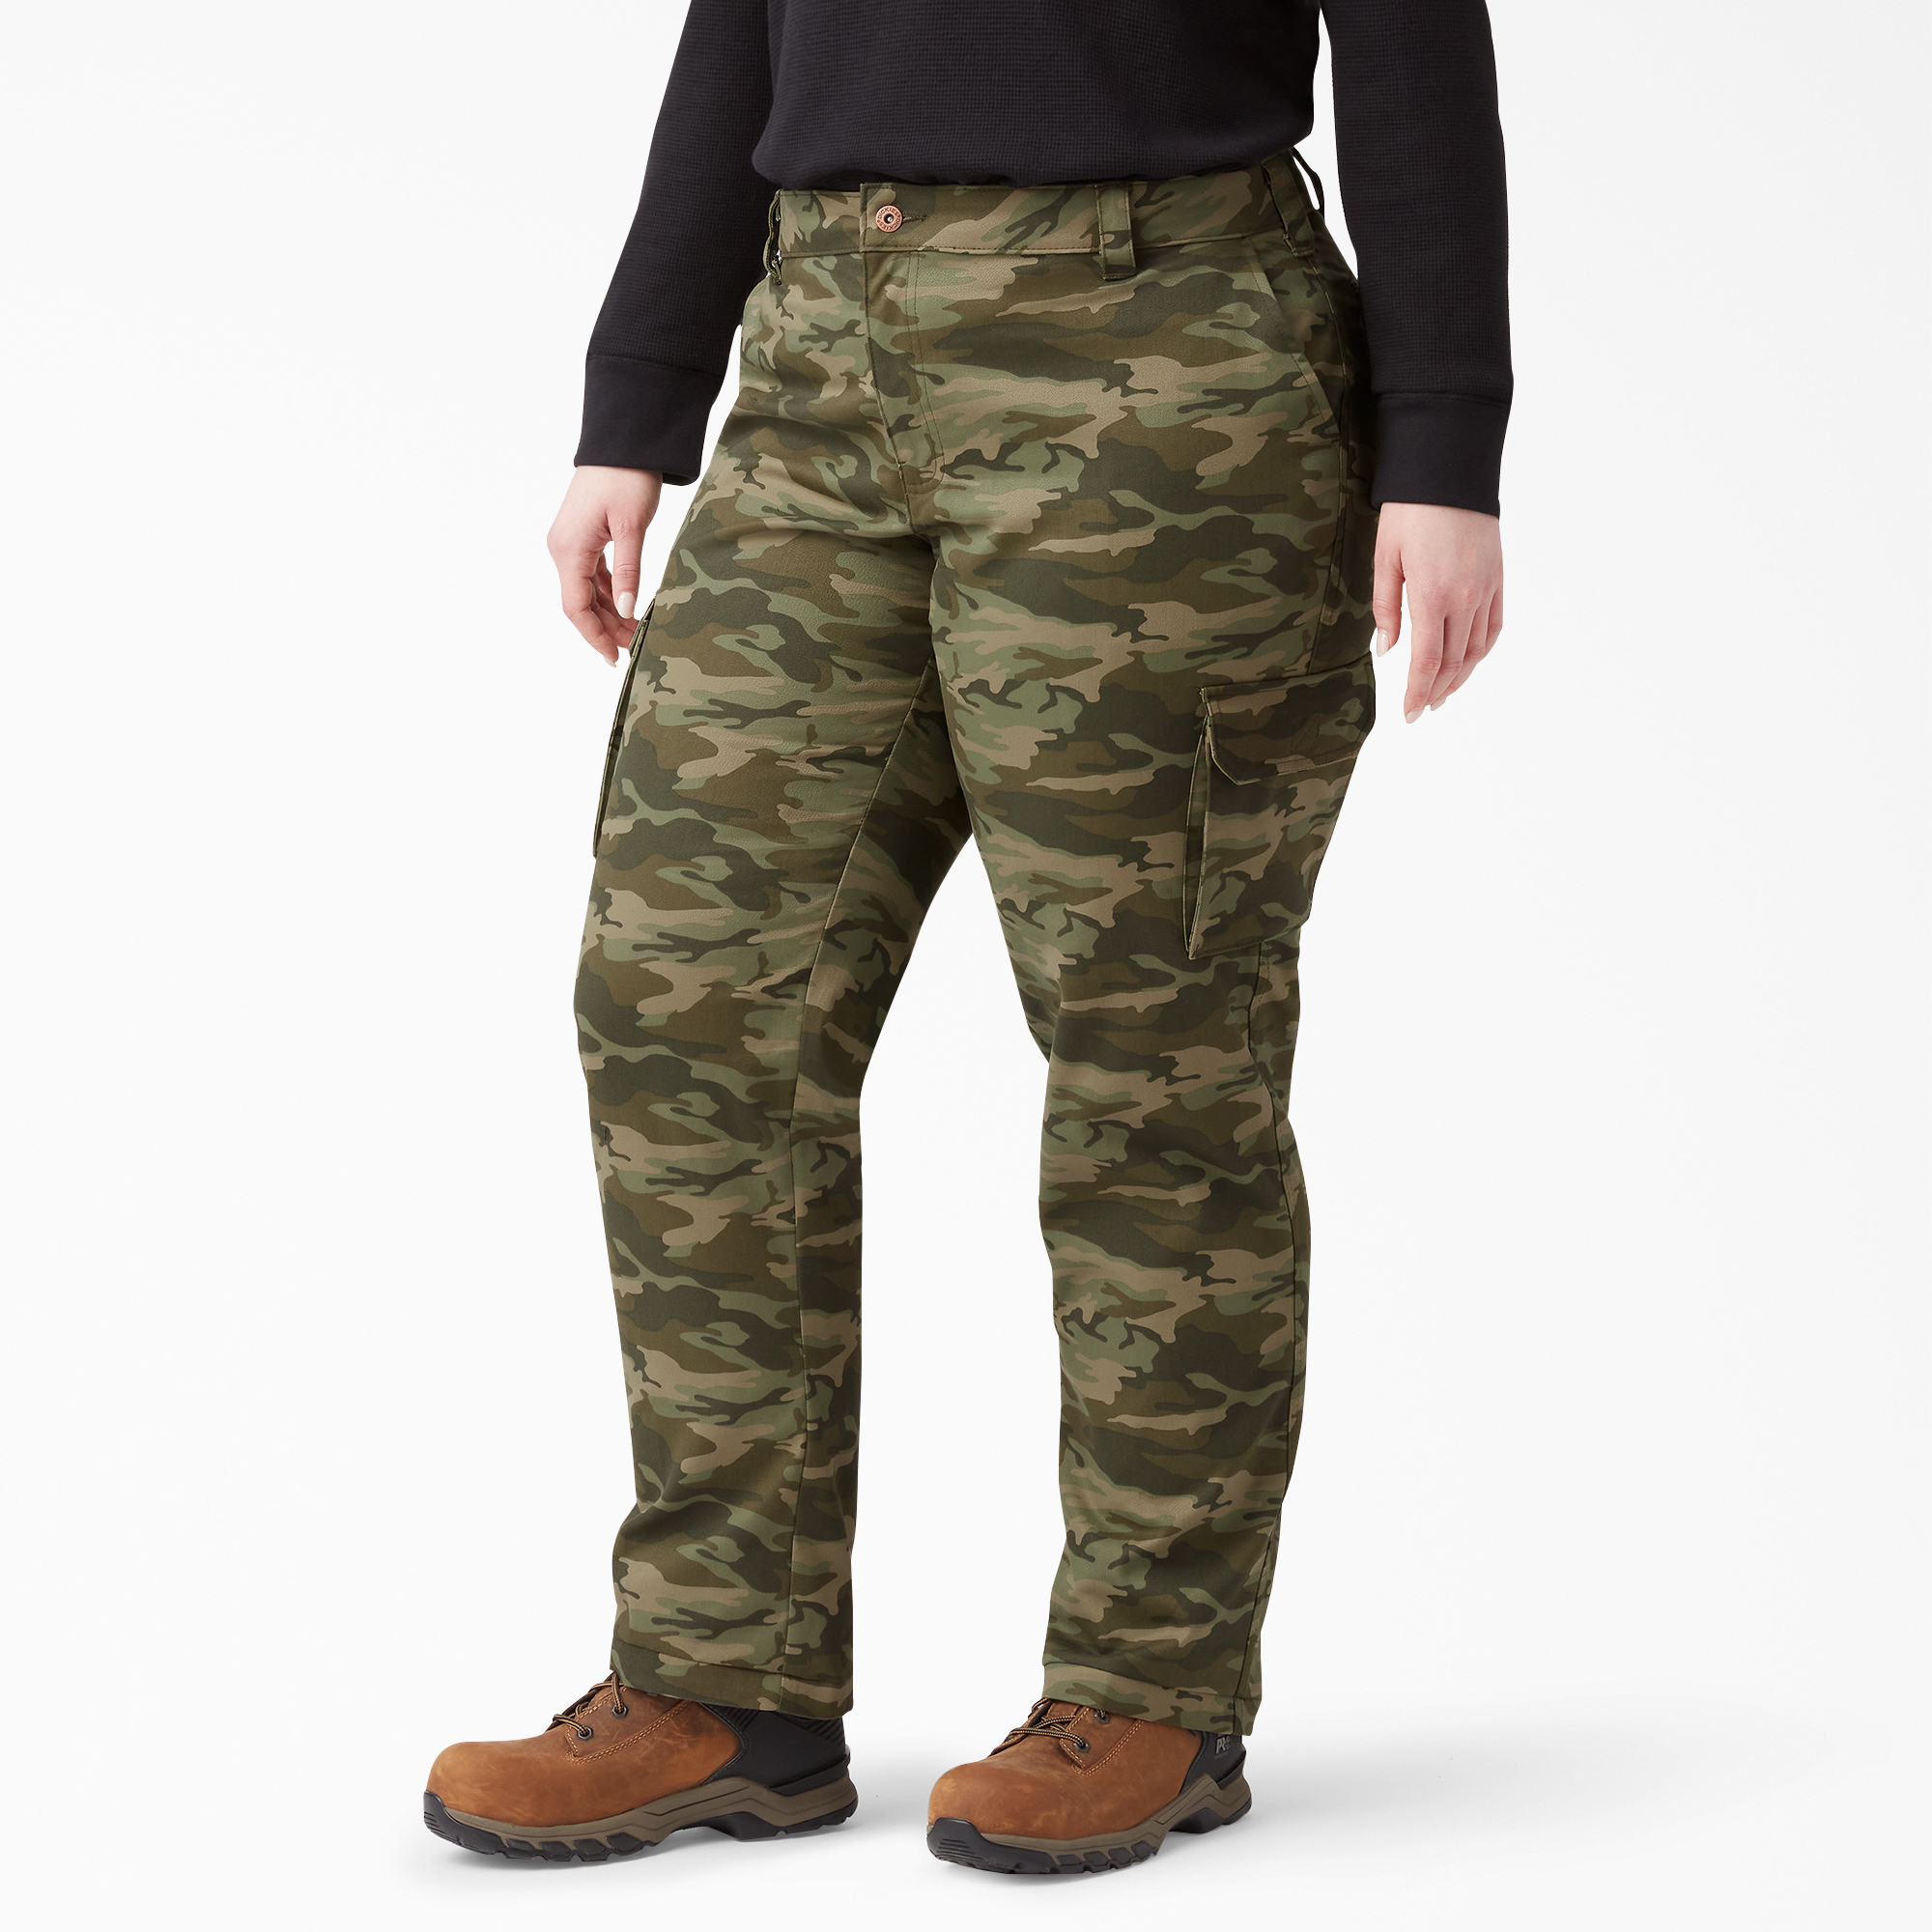 Women’s Plus Stretch Relaxed Cargo Pants - Light Sage Camo (LSC)